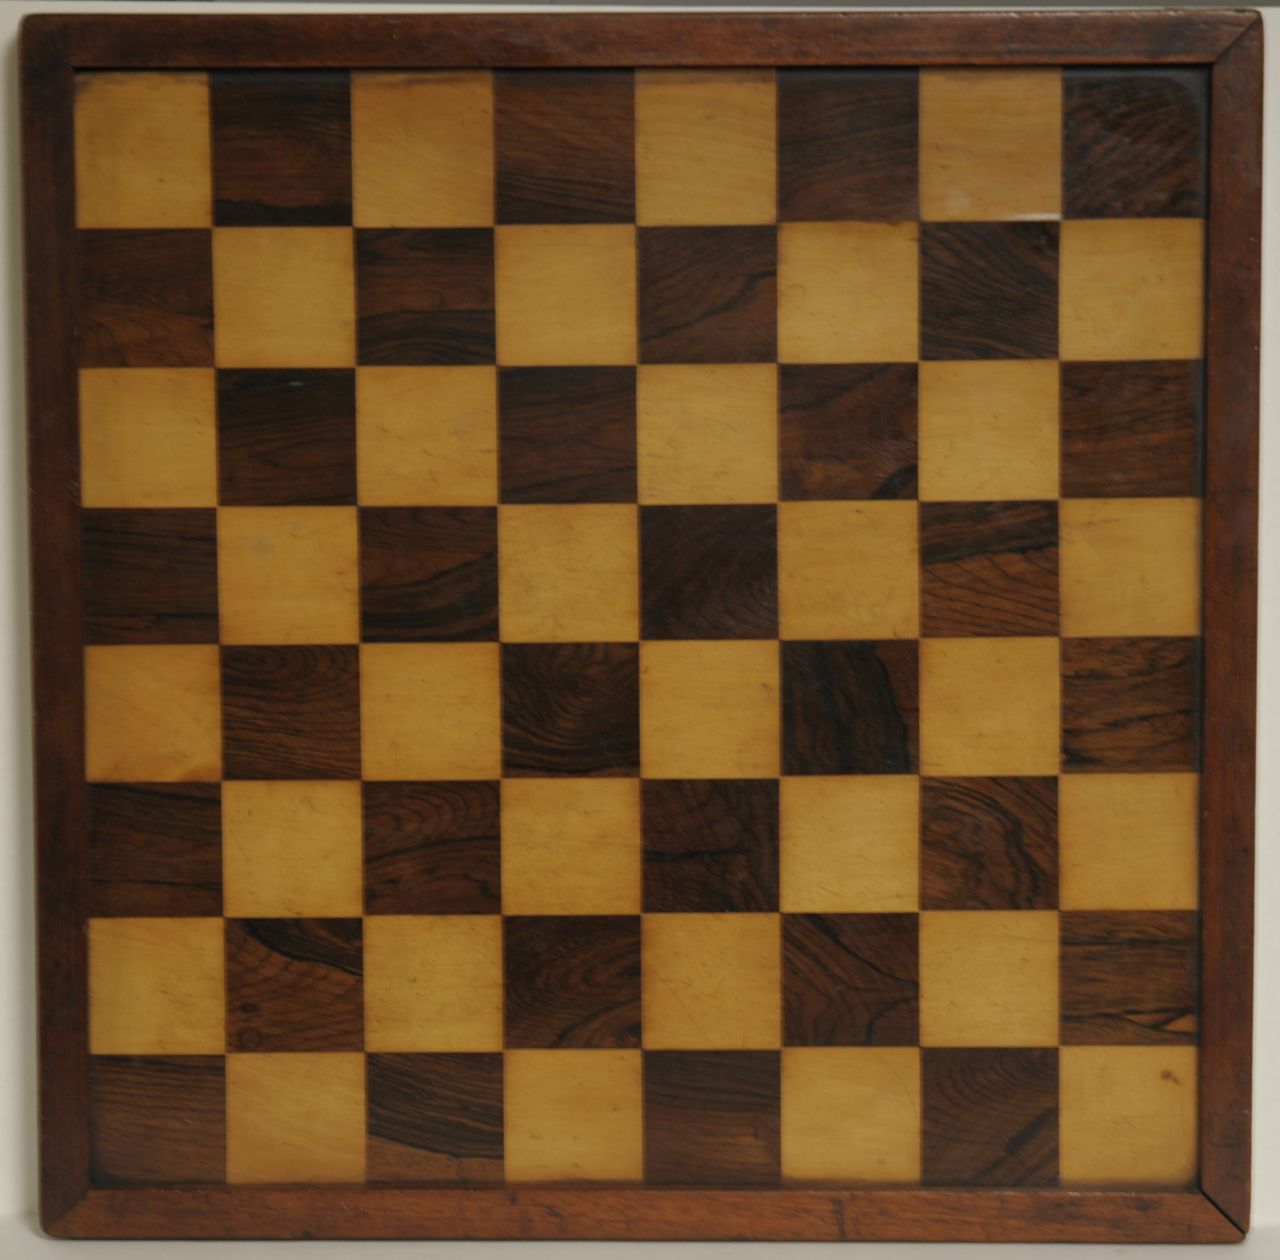 Schaakbord   | Schaakbord, A rosewood and boxwood veneered chess board, Rosen- und Palmholz 50,5 x 50,5 cm, executed in the late 19th century